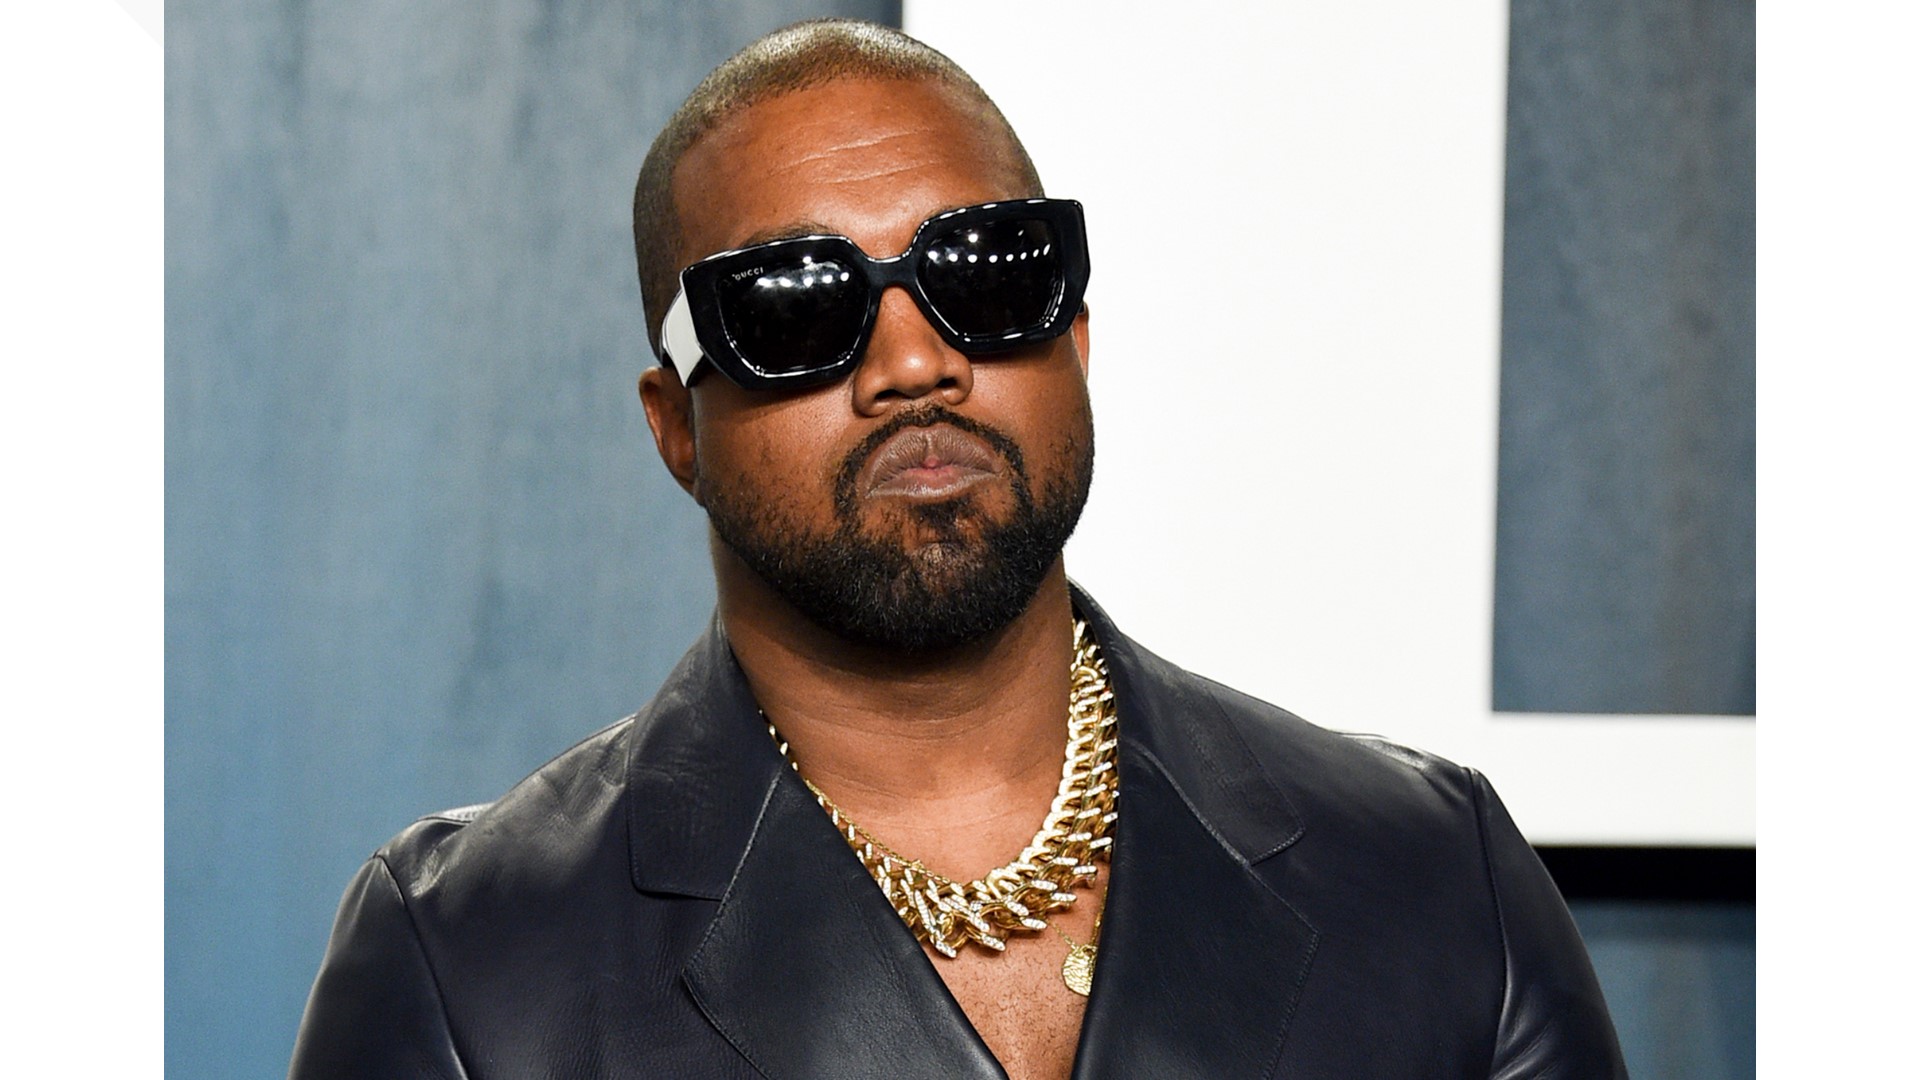 A completed documentary about the rapper formerly known as Kanye West has been shelved amid his recent slew of antisemitic remarks.